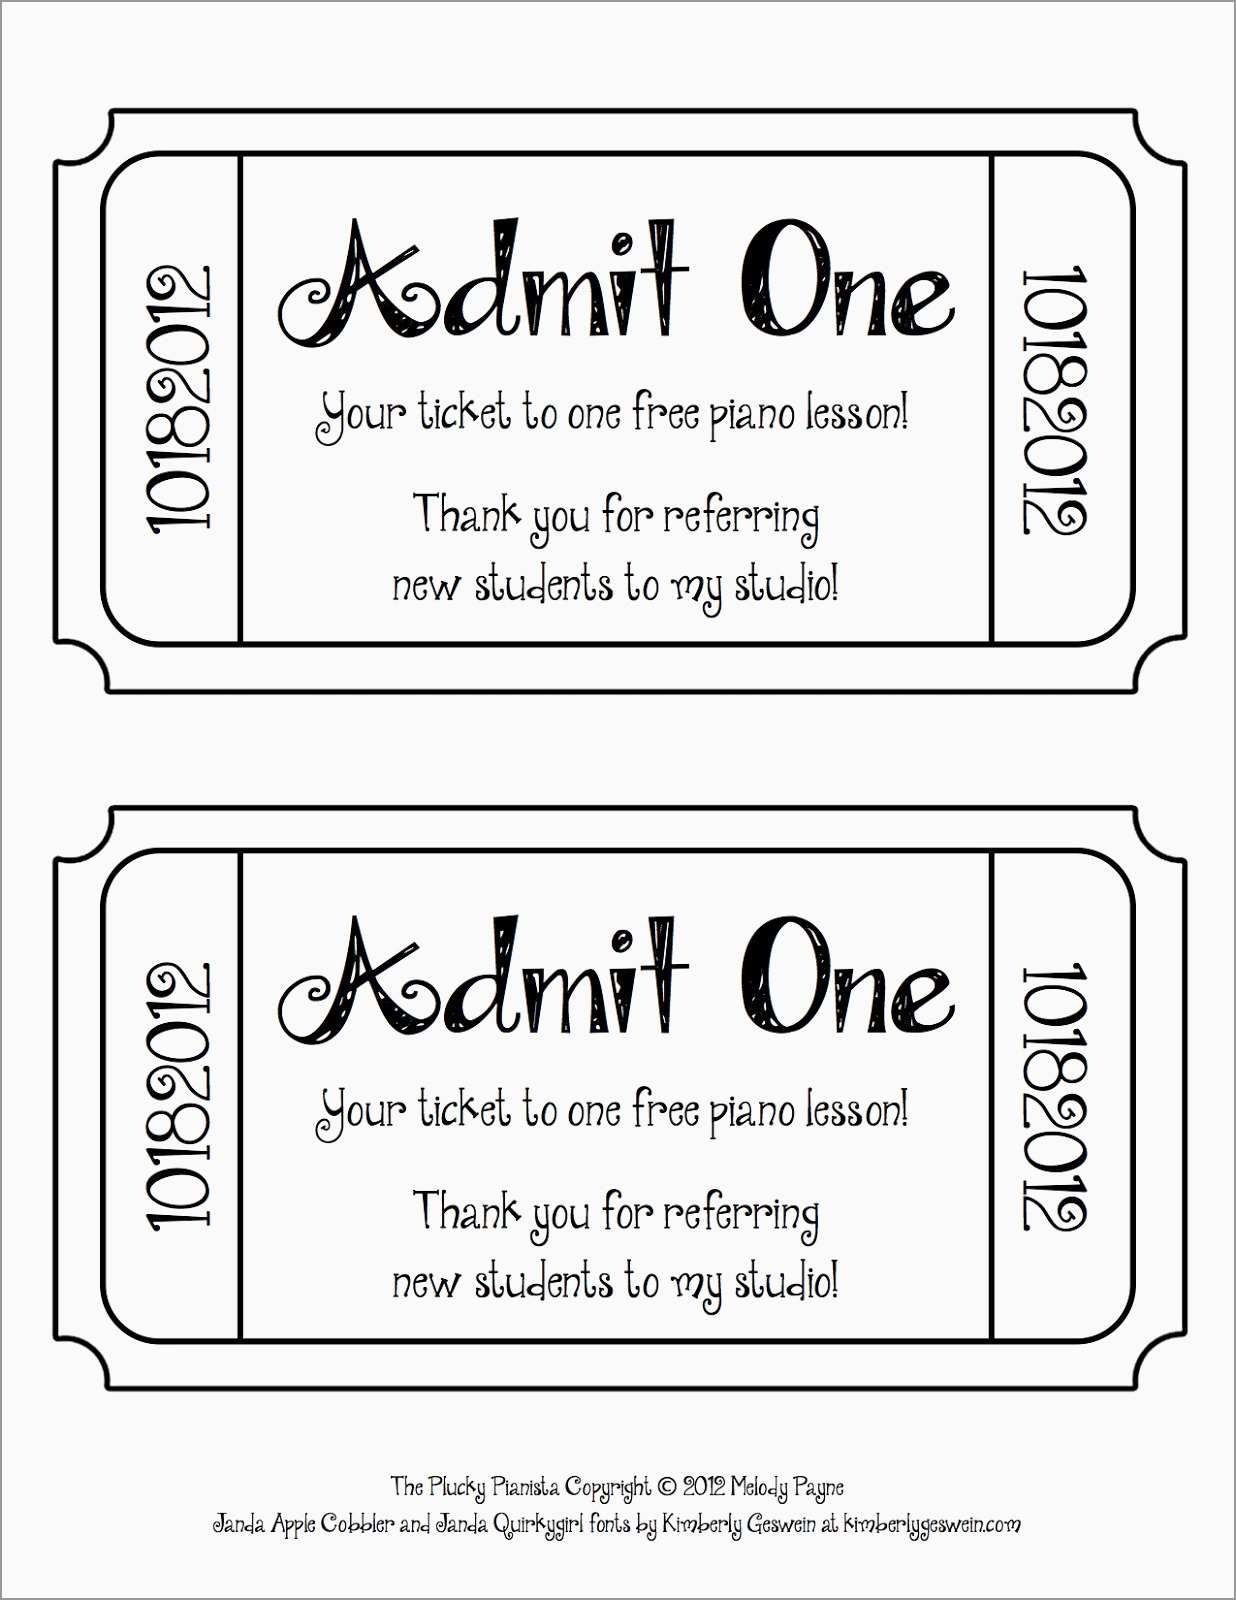 Lovely Free Ticket Stub Template | Best Of Template - Free Printable Raffle Tickets With Stubs